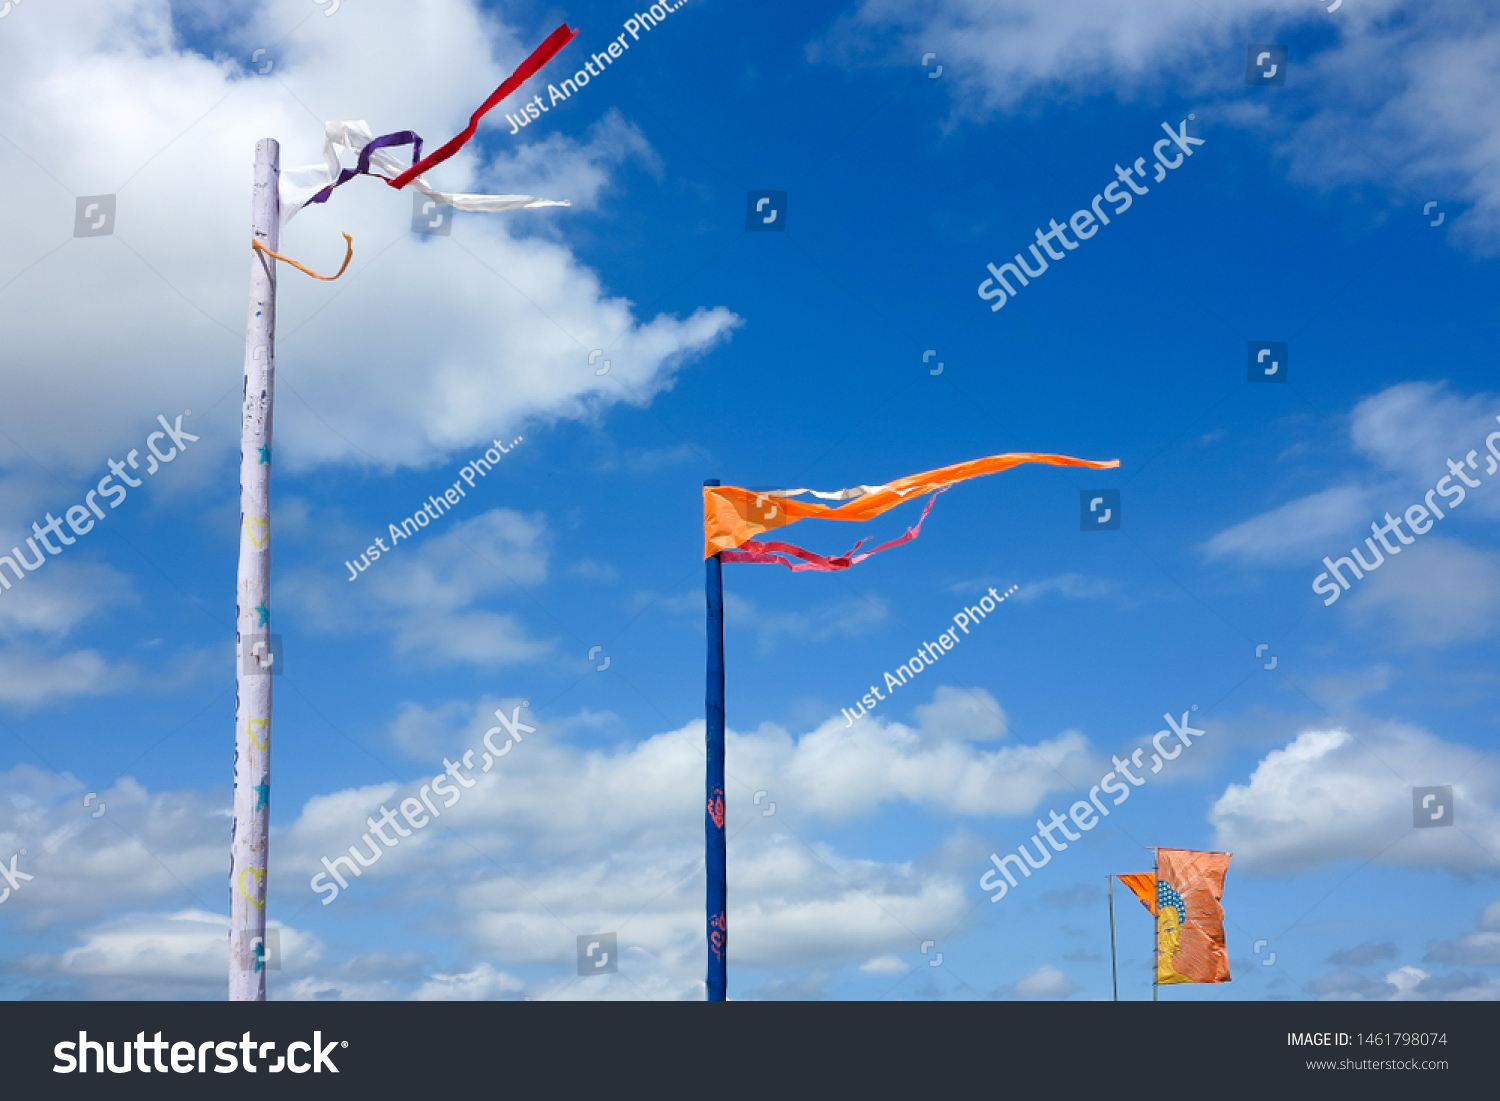 Brightly coloured orange flags wave against a bright blue sky with clouds.  Image has copy space. #1461798074